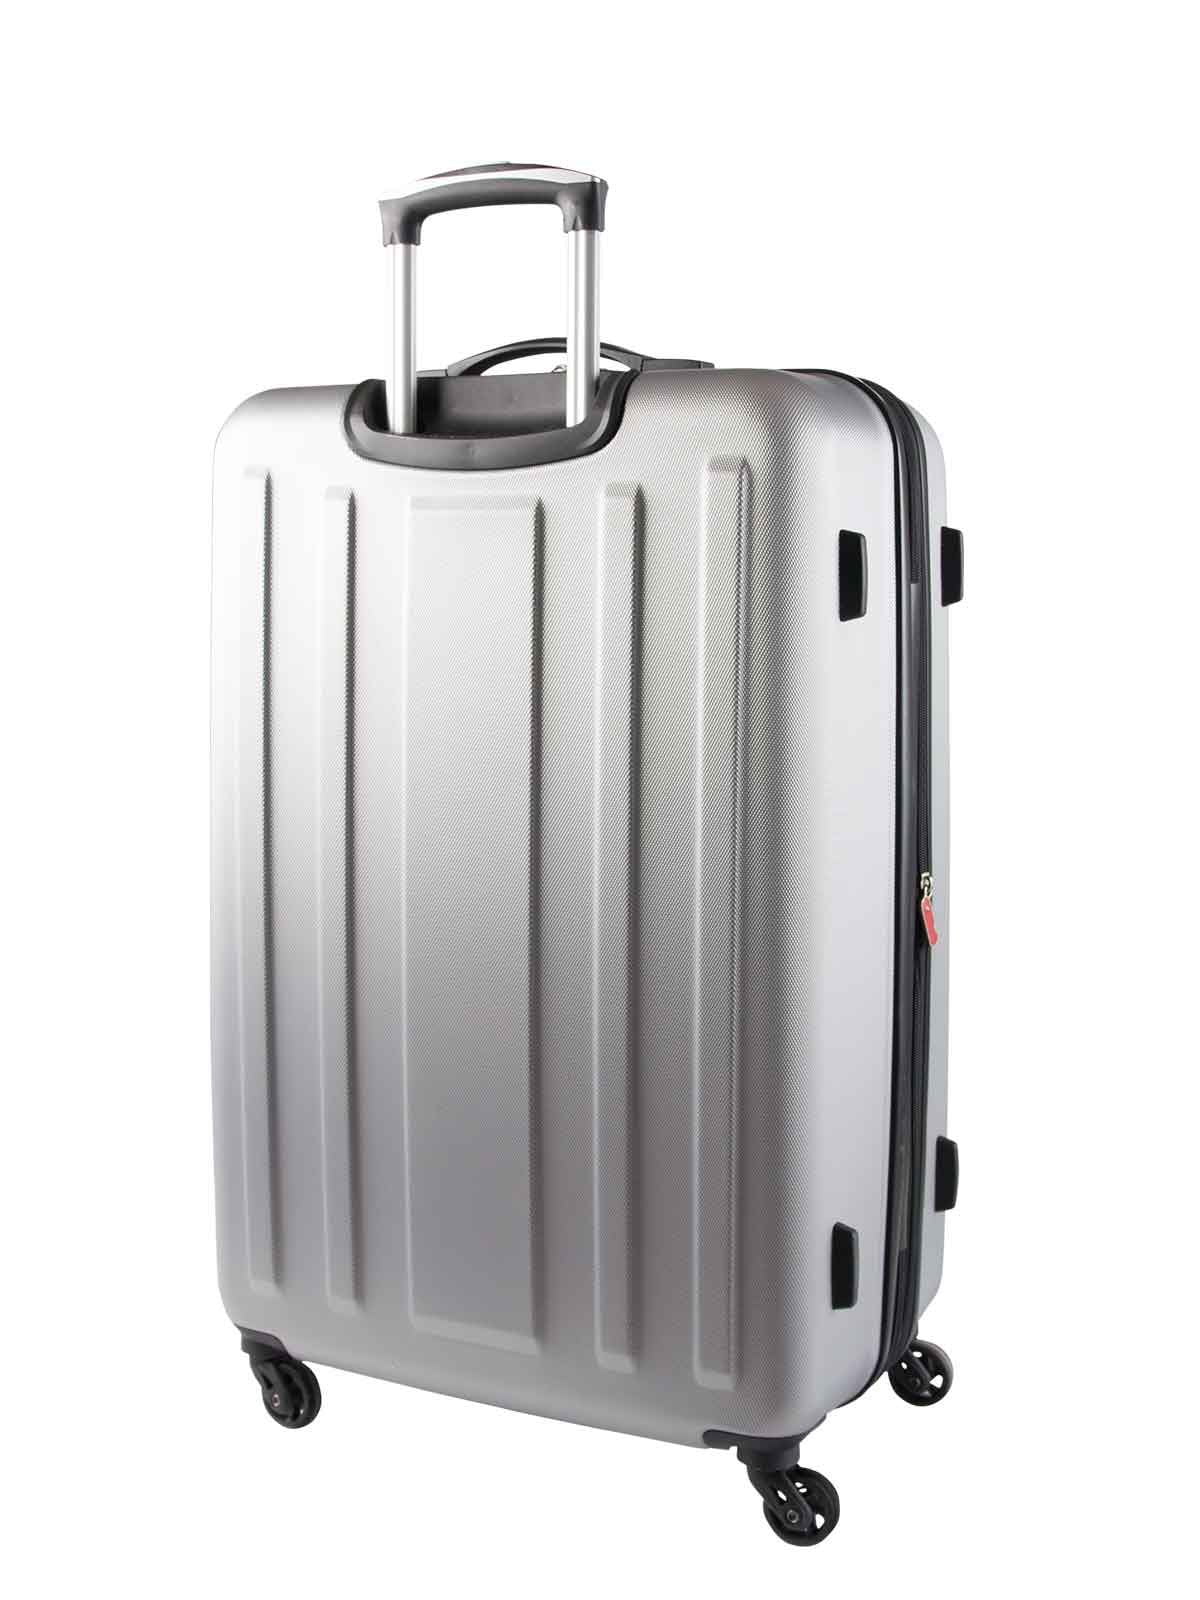 Swiss Gear ABS La Sarinne Lite 3 Piece Moulded Hardside Expandable Spinner Luggage Set